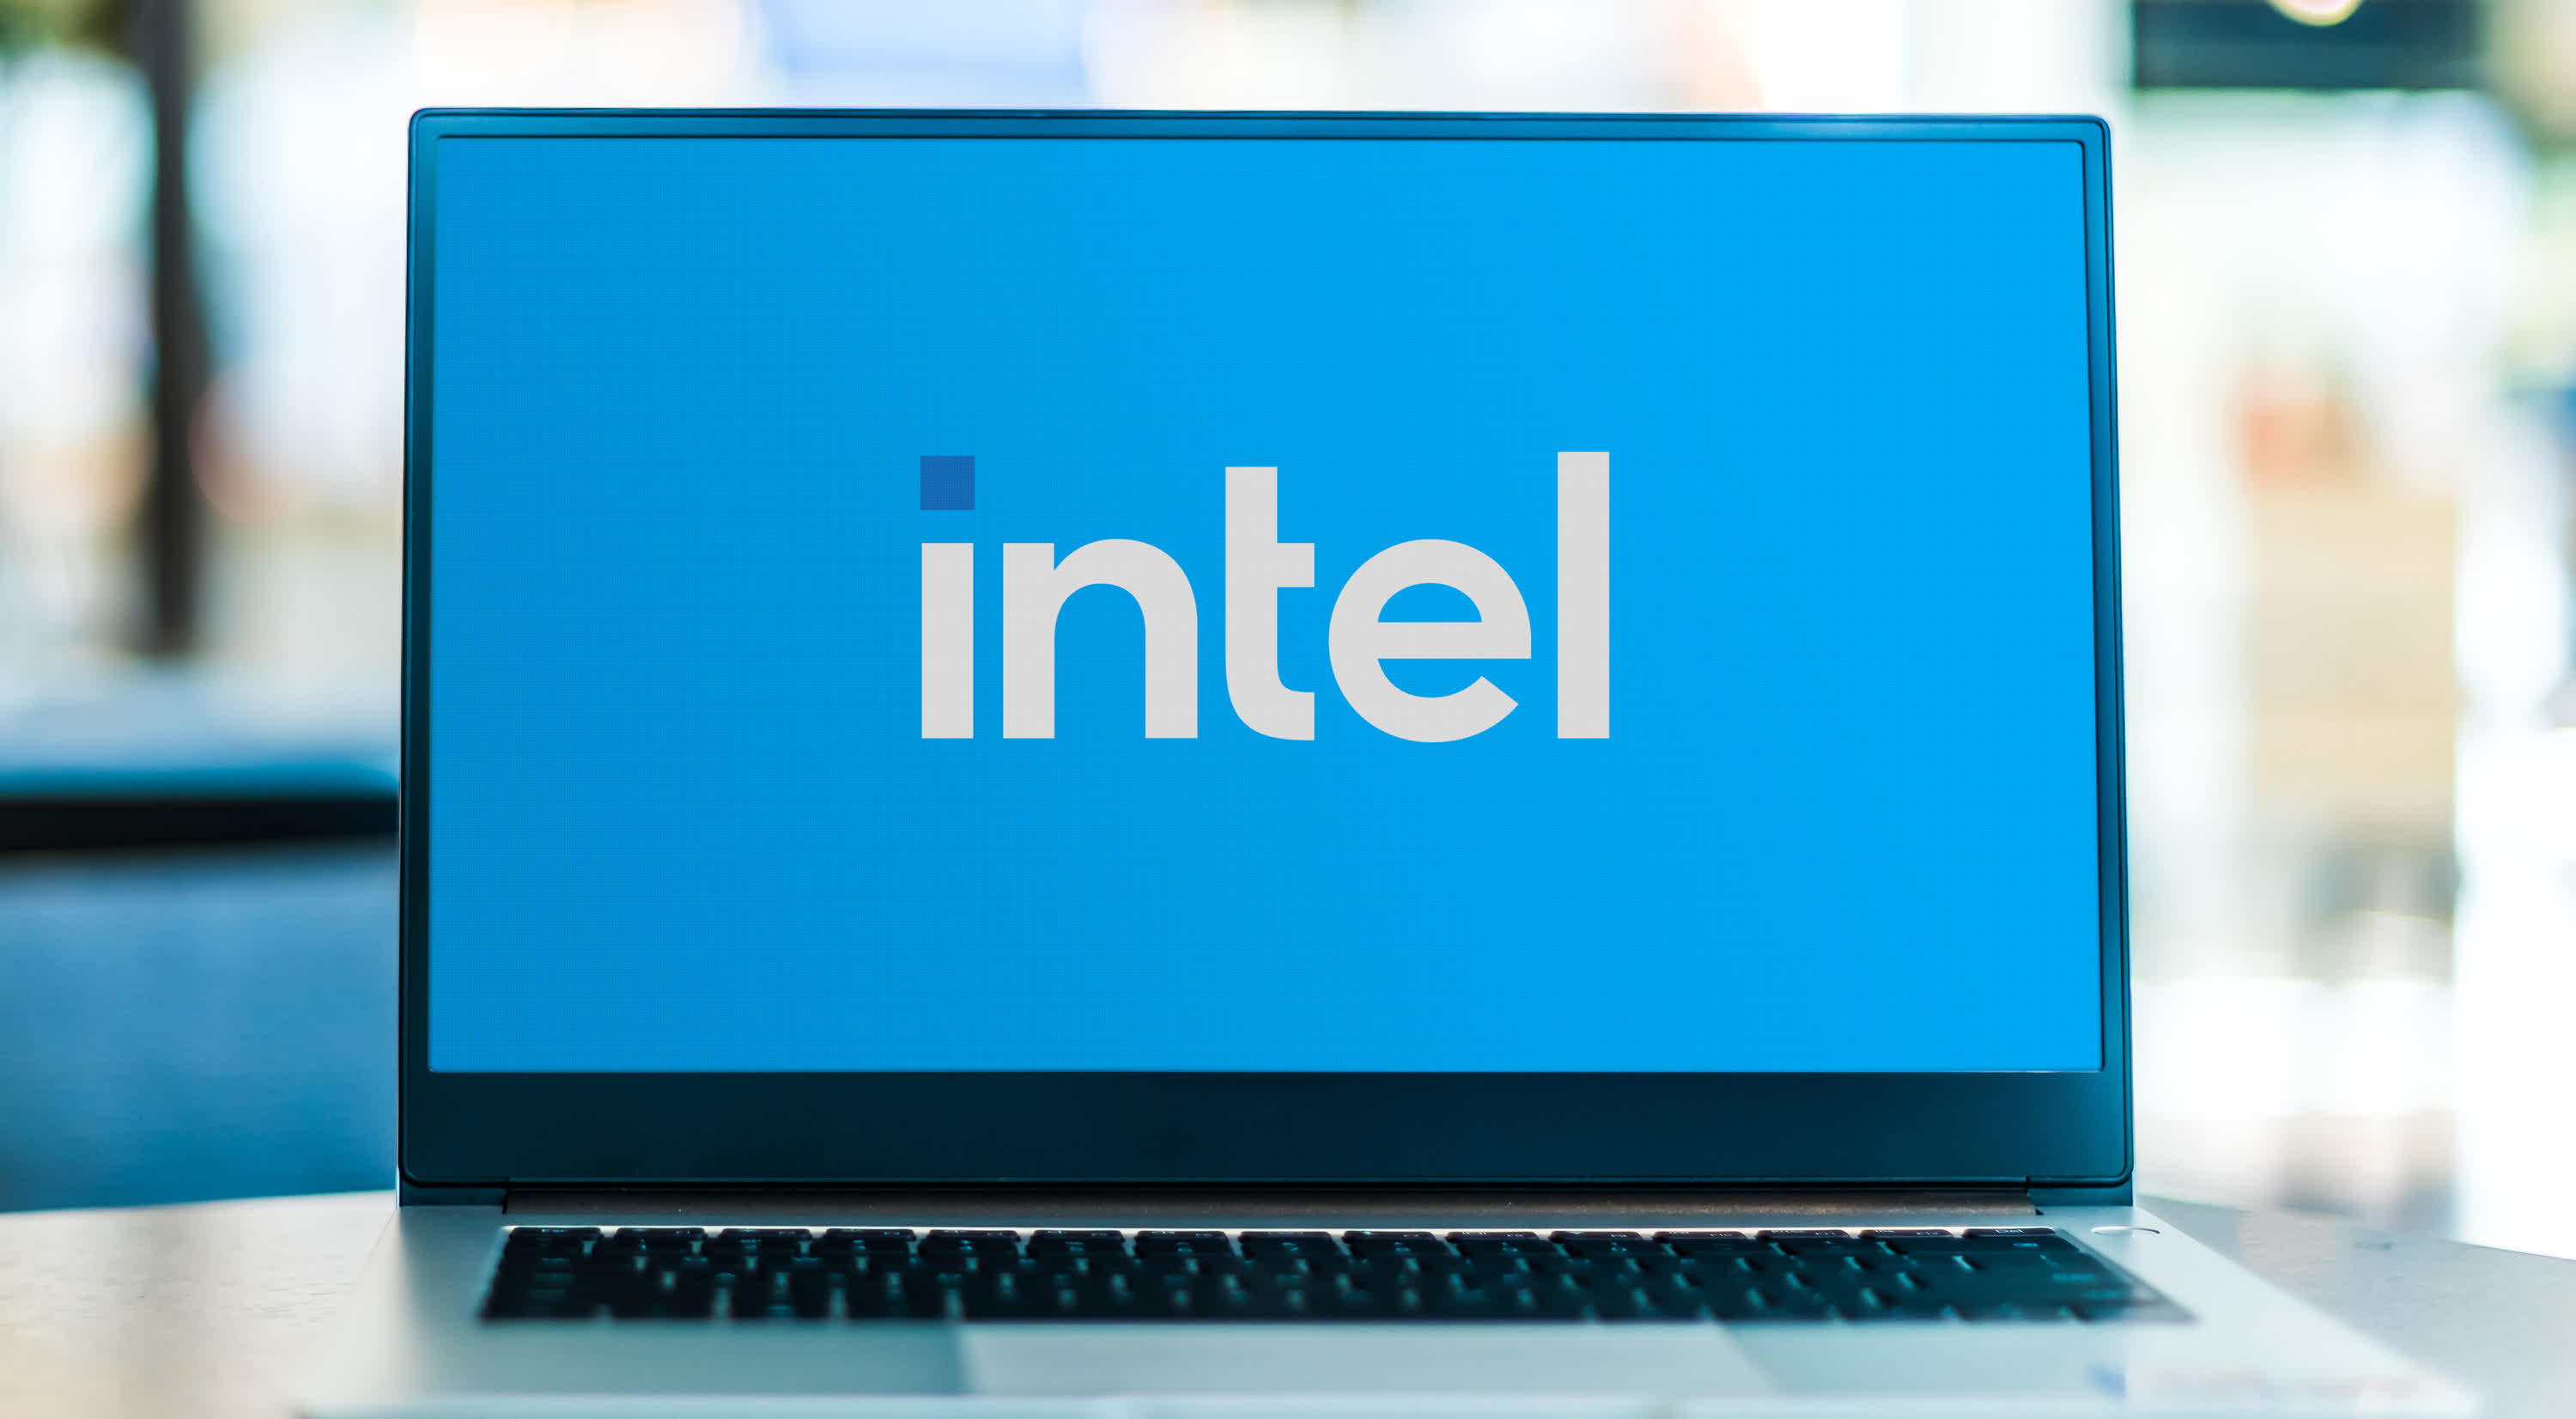 Intel bets its future on software and manufacturing